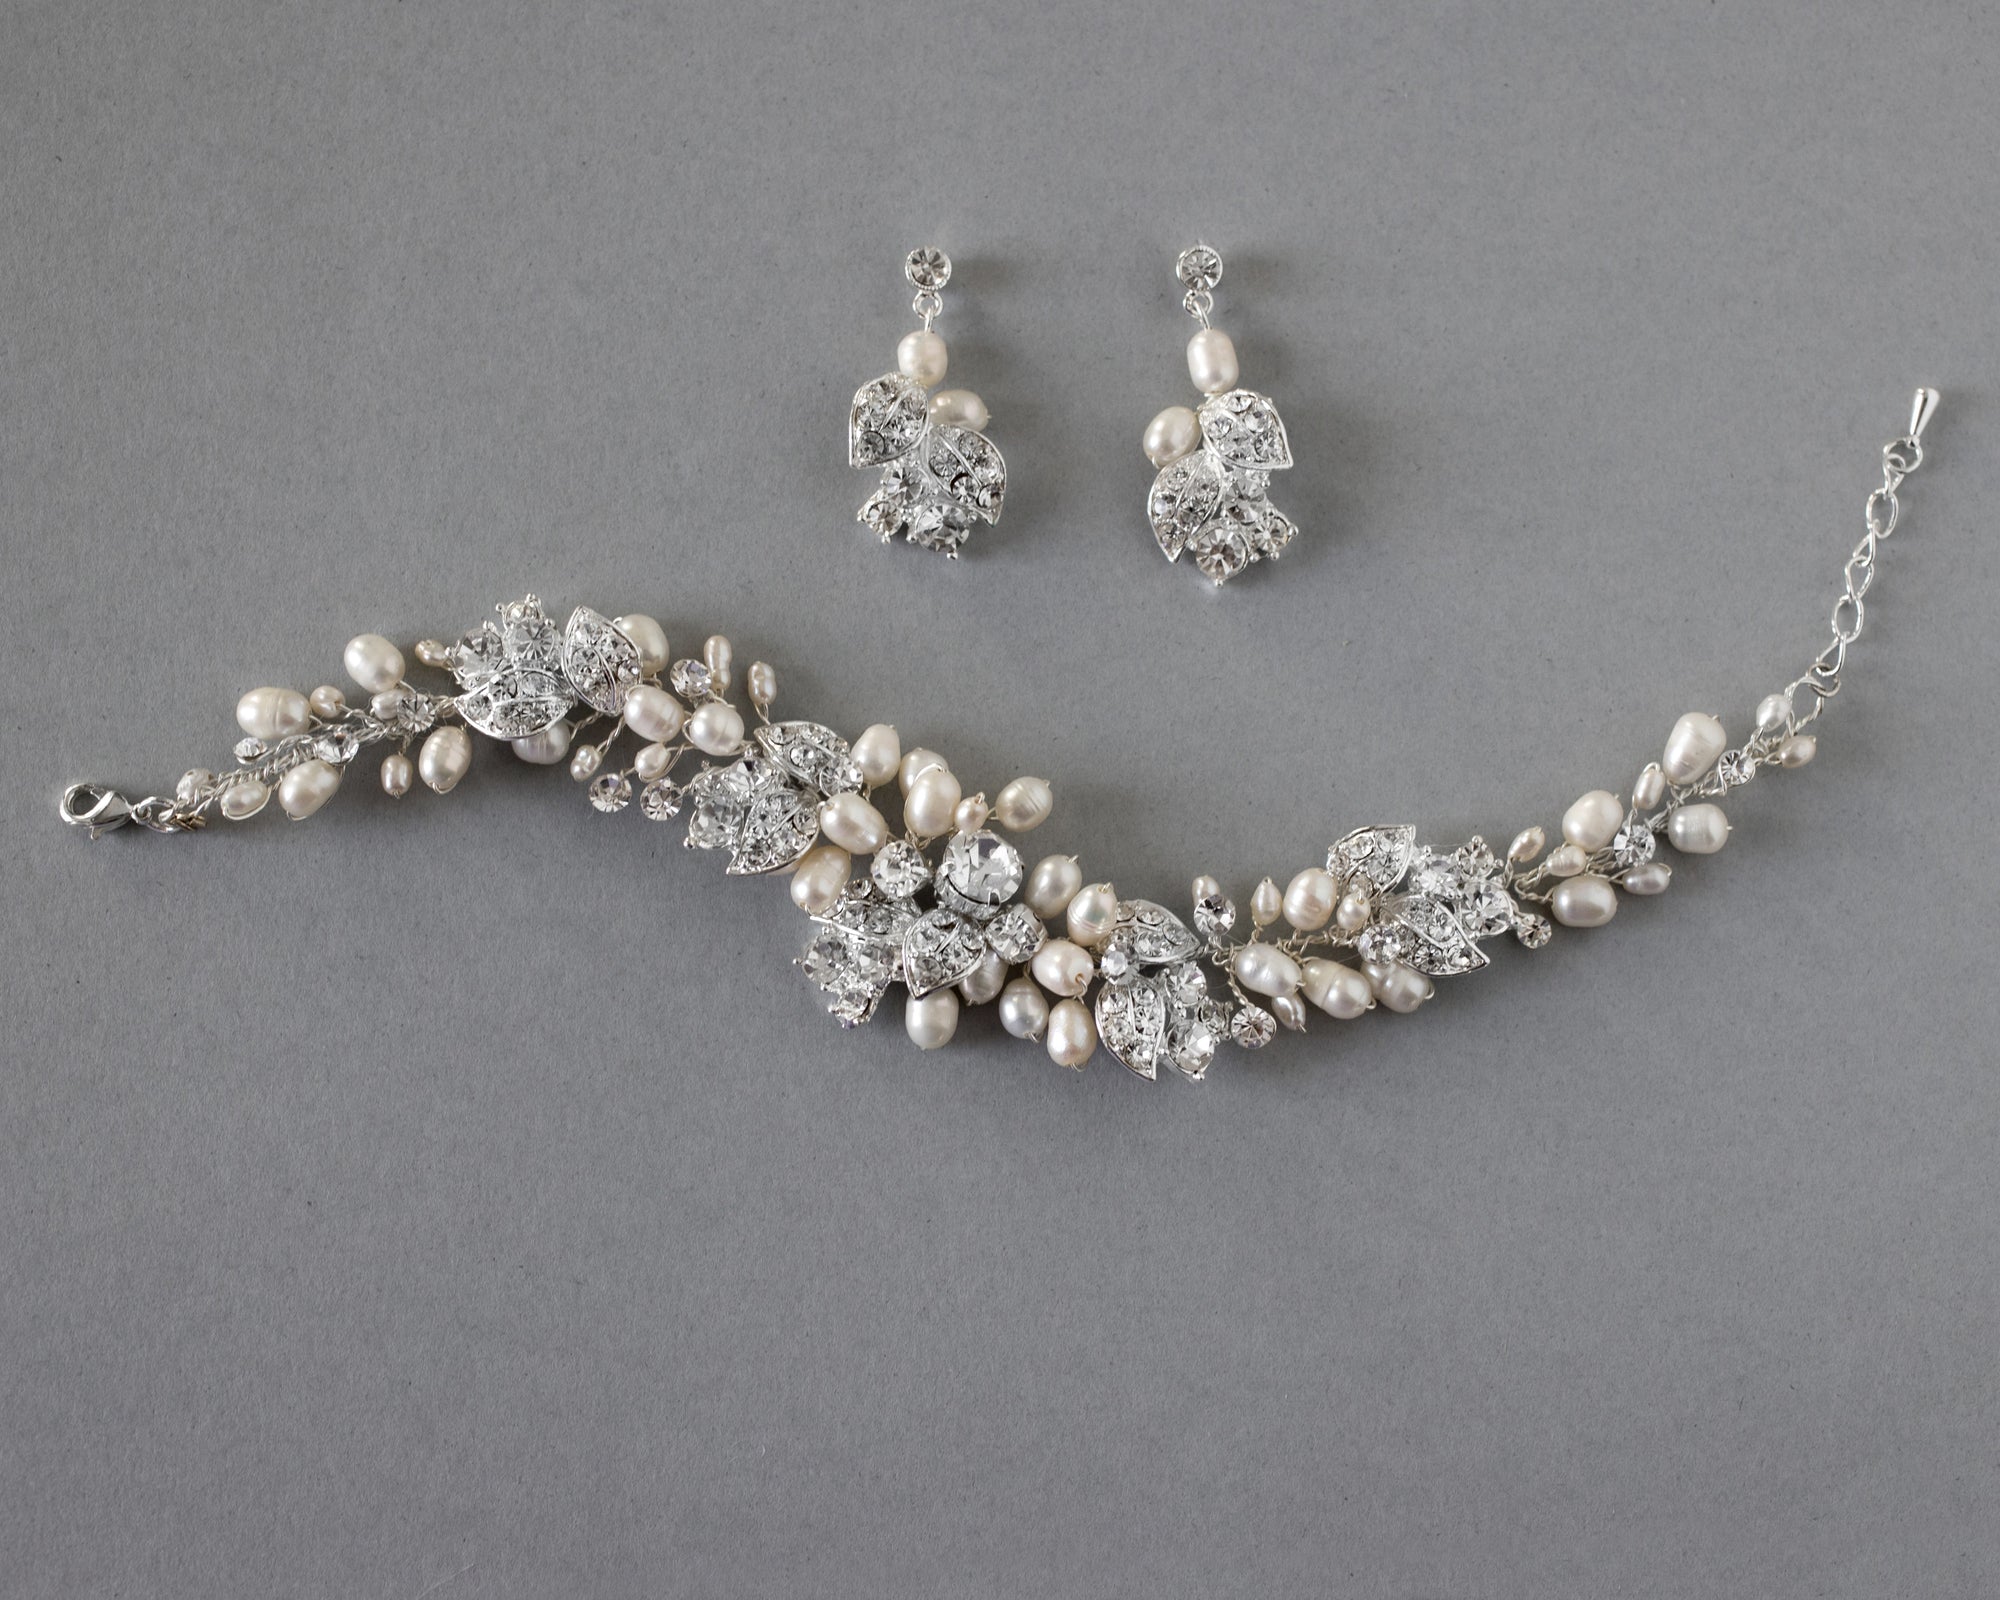 Freshwater Pearl and Crystal Bracelet and Earrings - Cassandra Lynne